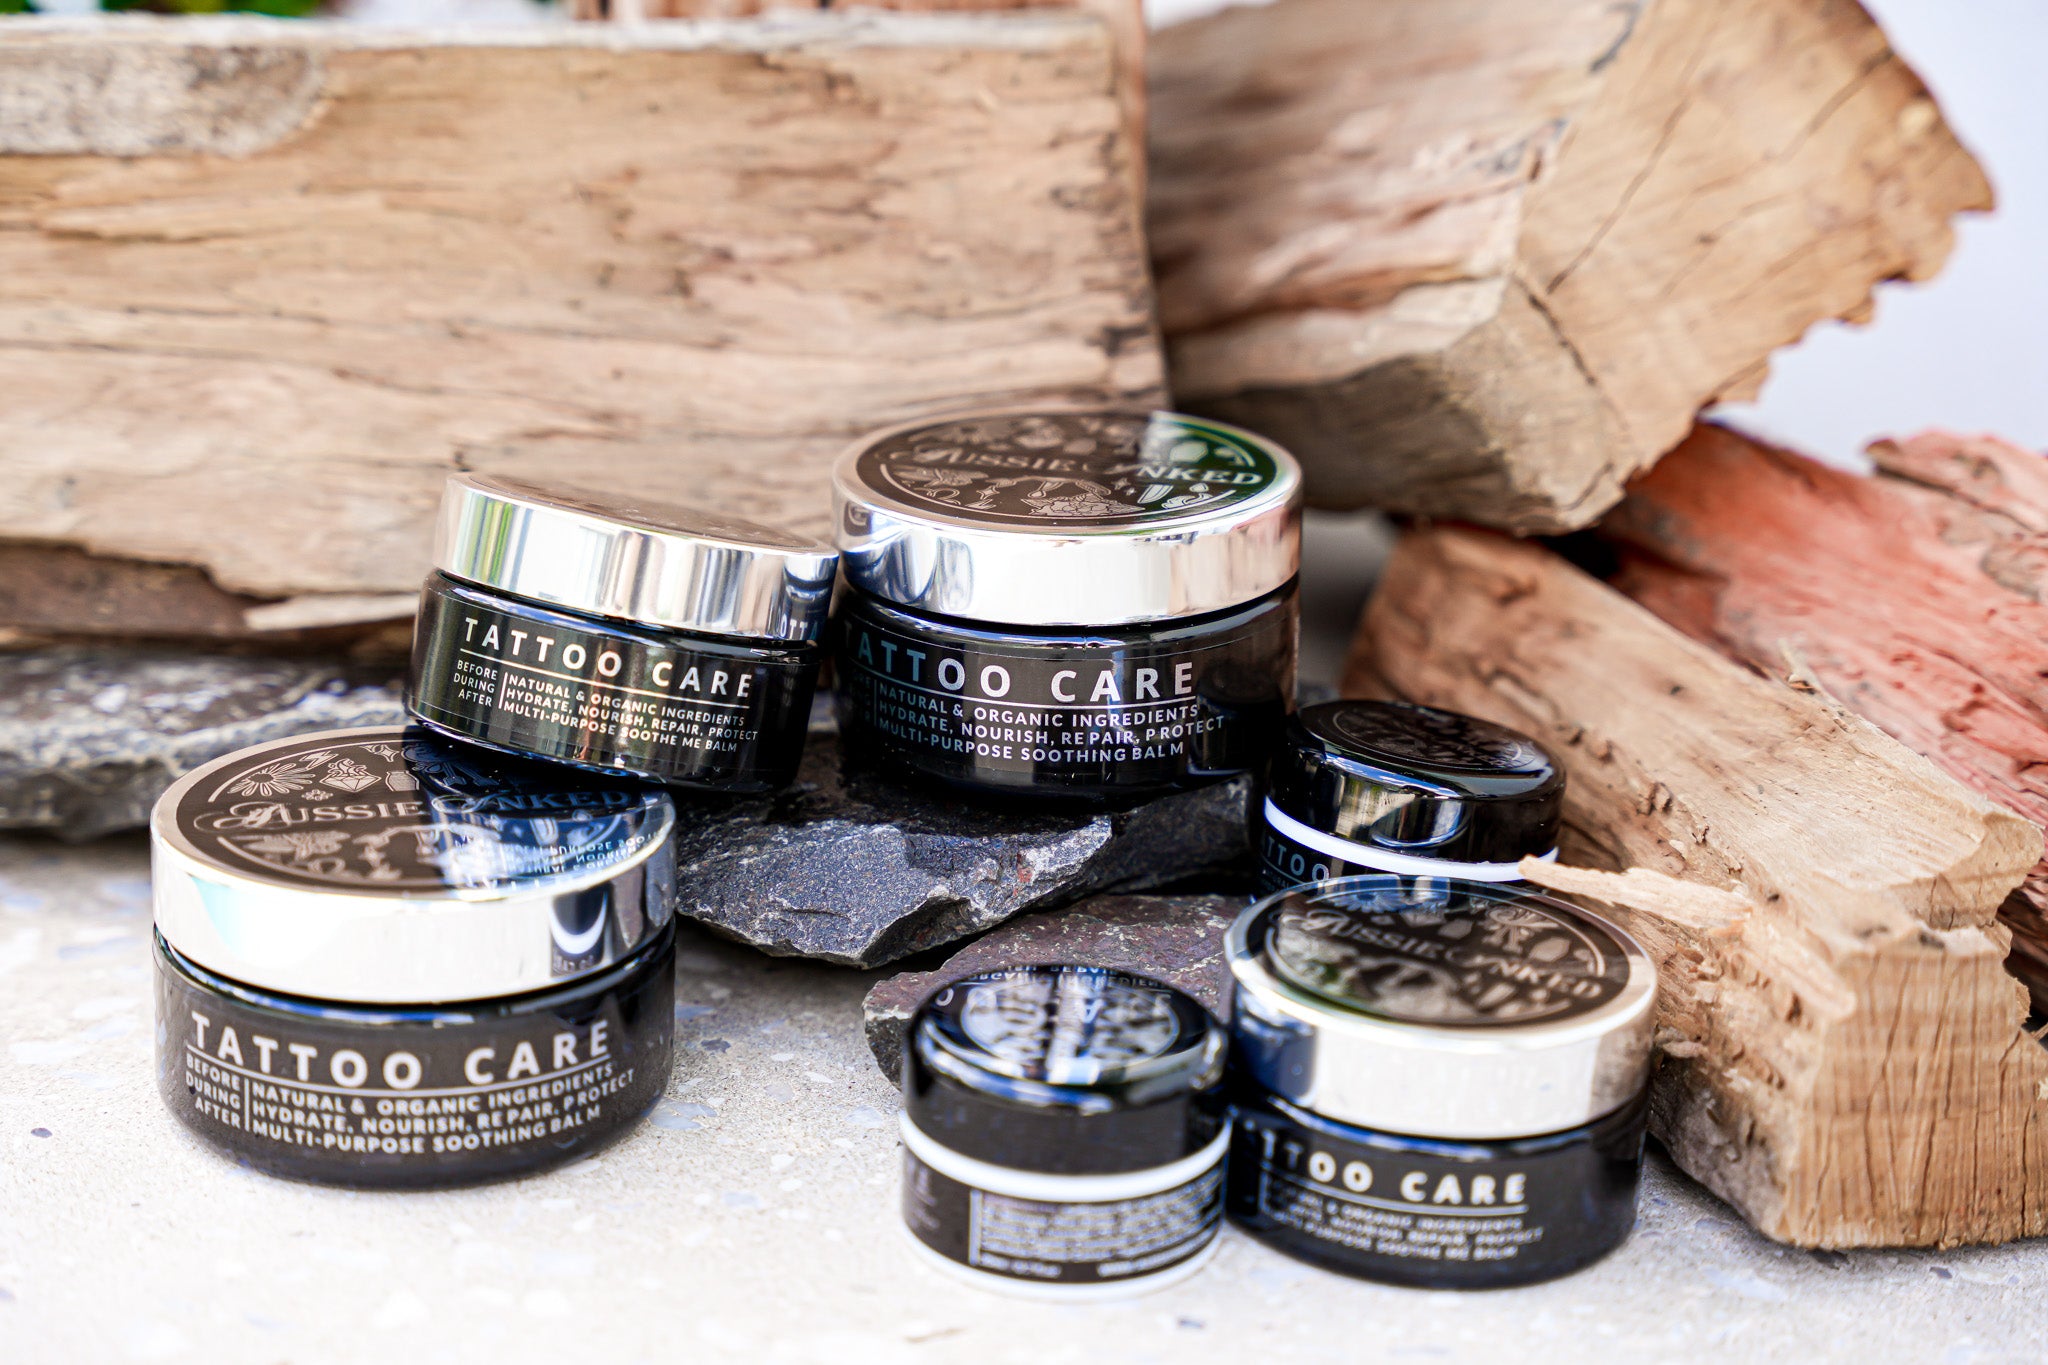 Tattoo Care Cream Shot › The Wildcat Collection